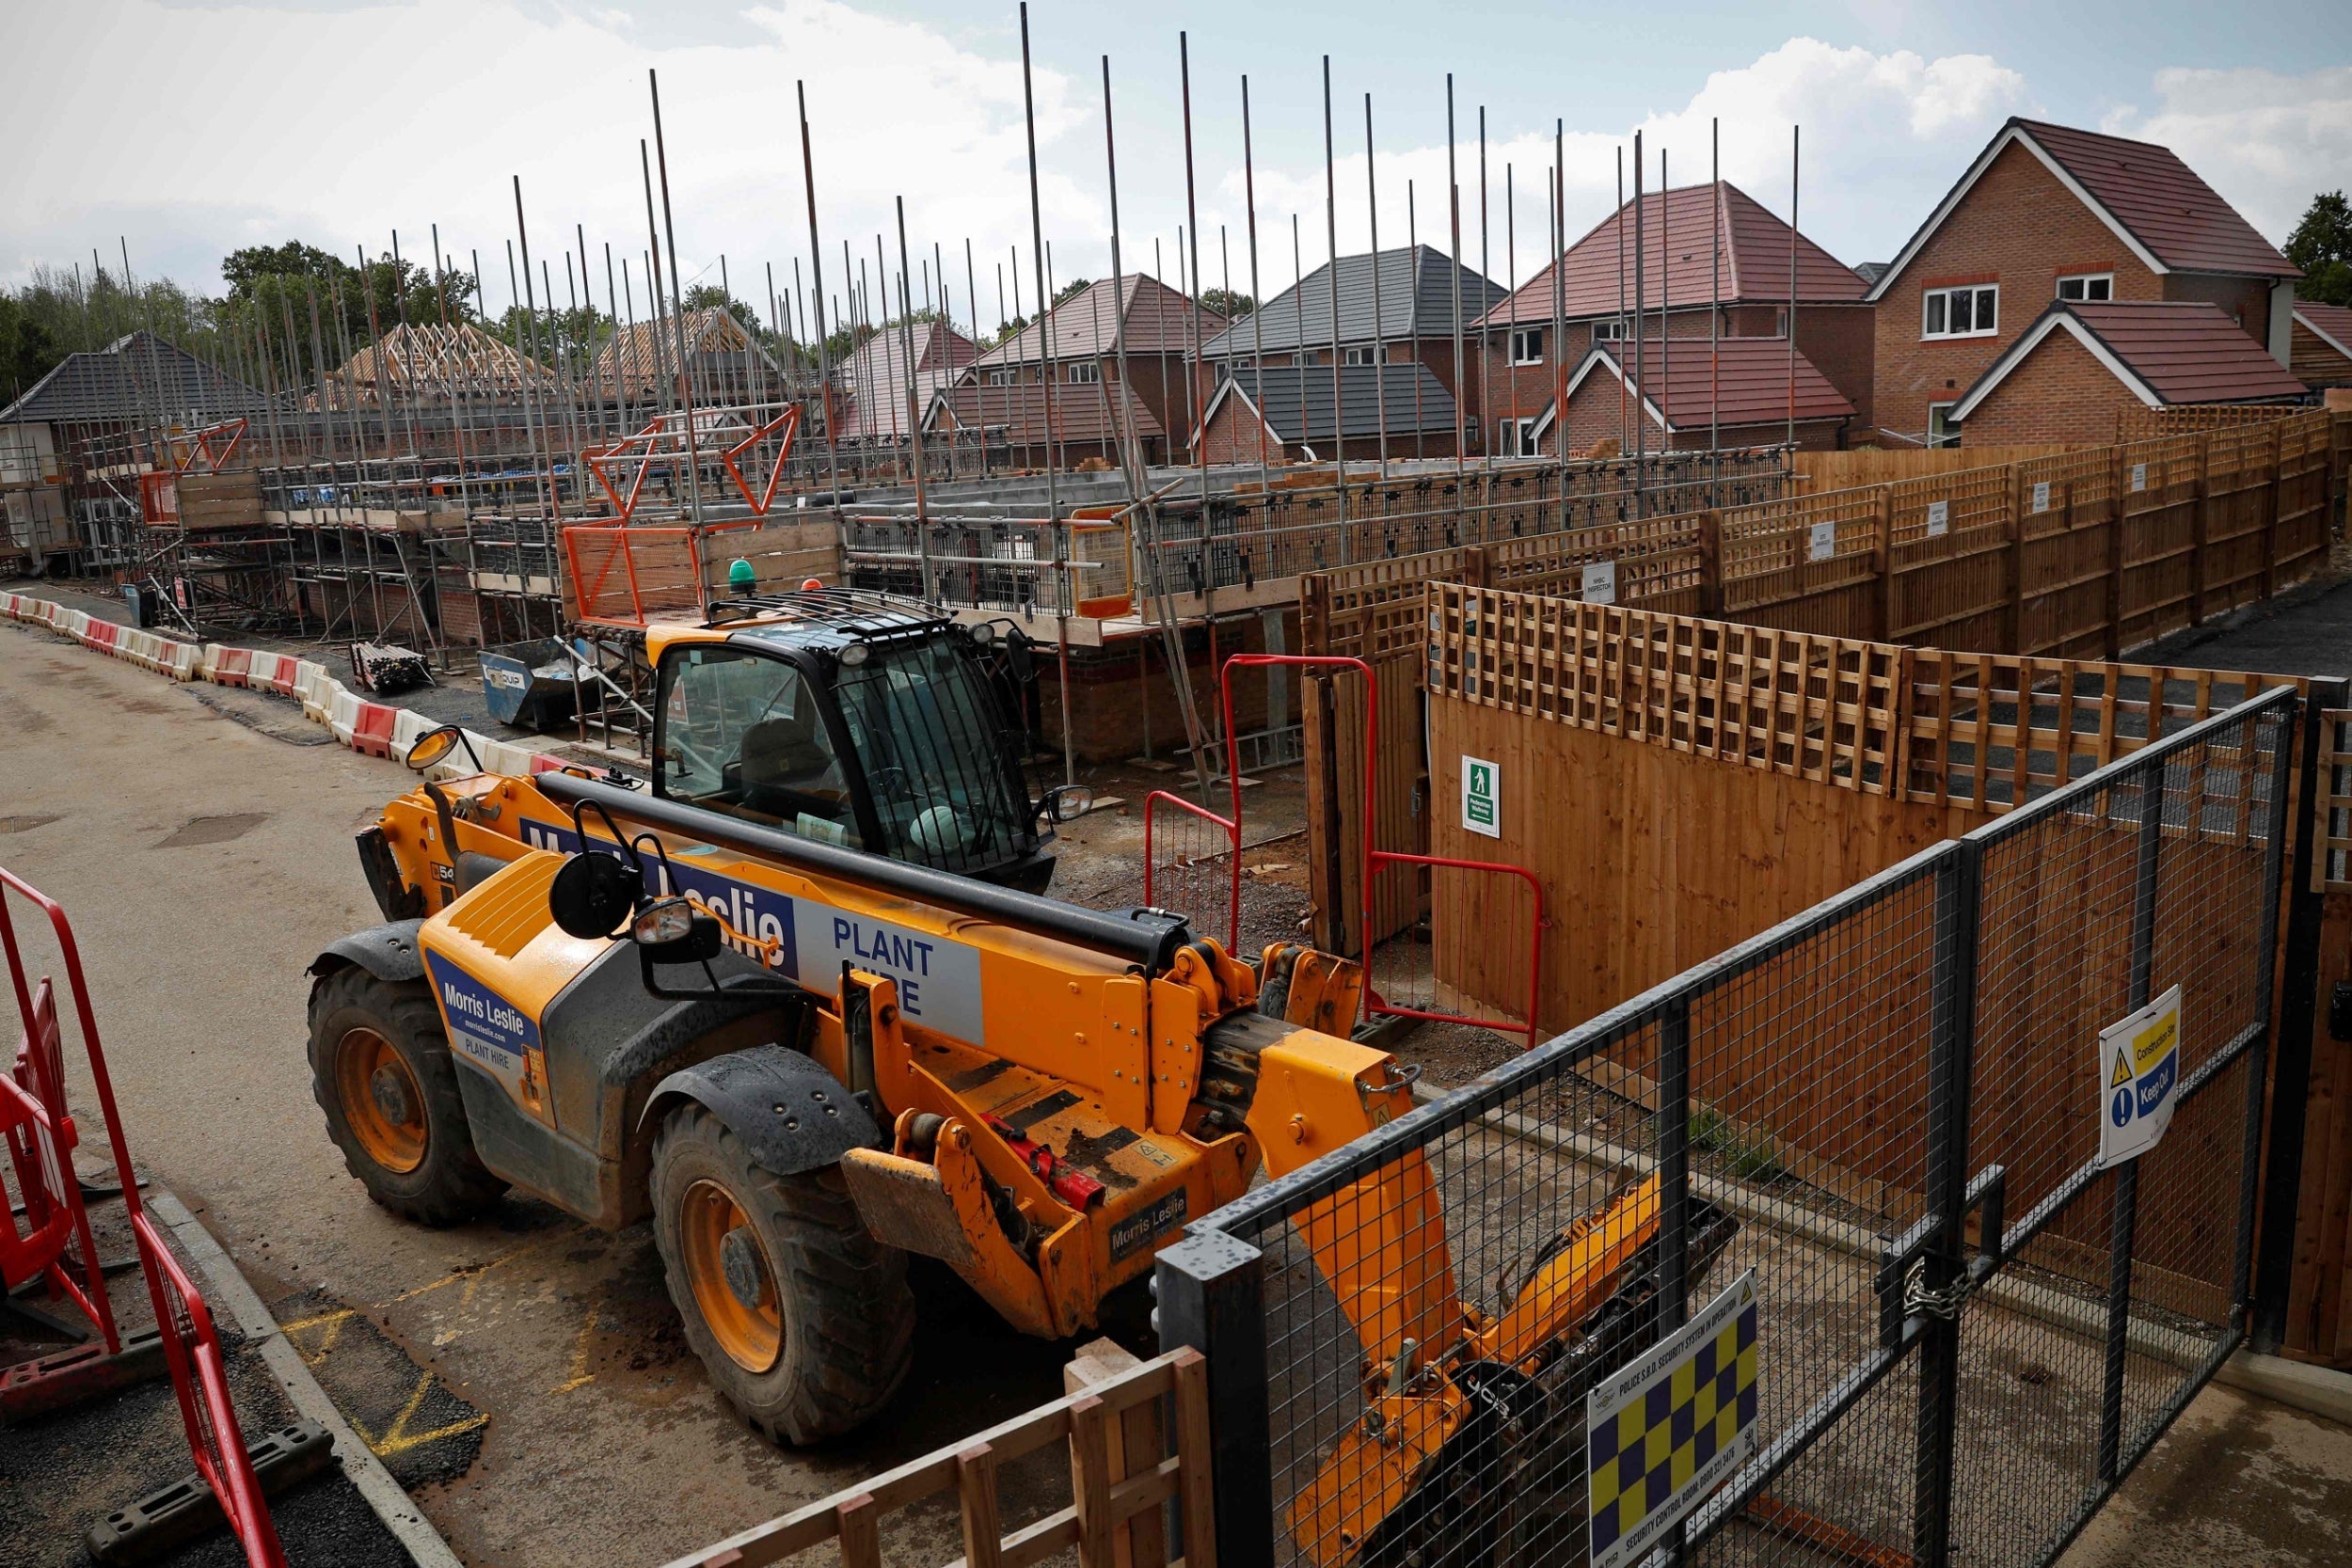 New-build residential homes are pictured during construction at a Redrow housing development, stalled due to the COVID-19 pandemic